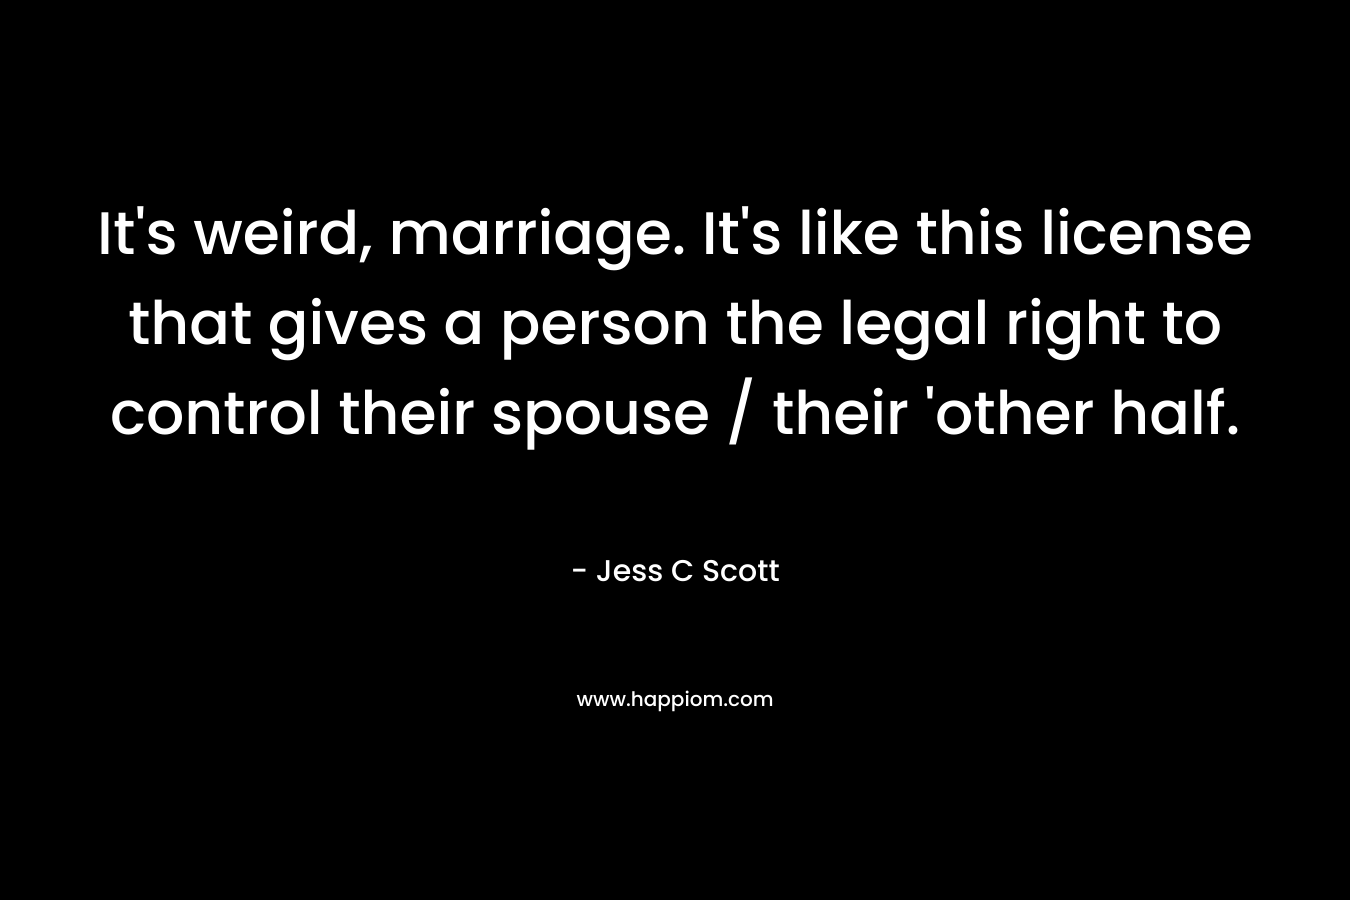 It’s weird, marriage. It’s like this license that gives a person the legal right to control their spouse / their ‘other half. – Jess C Scott